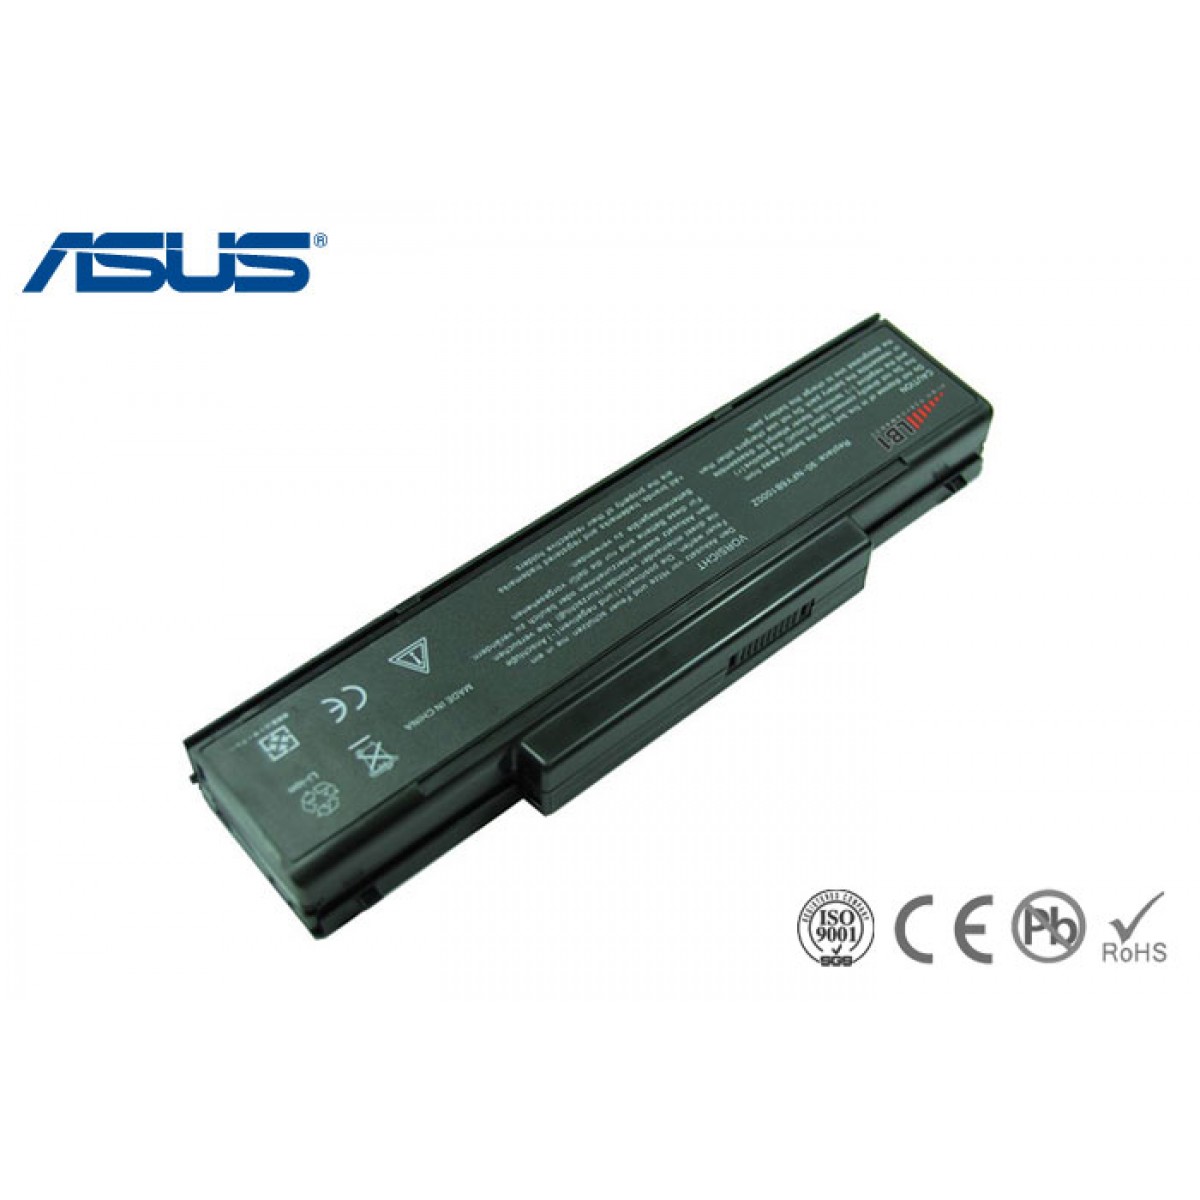 BATTERY FOR NOTEBOOK ASUS M51A COPY, Laptop Battery